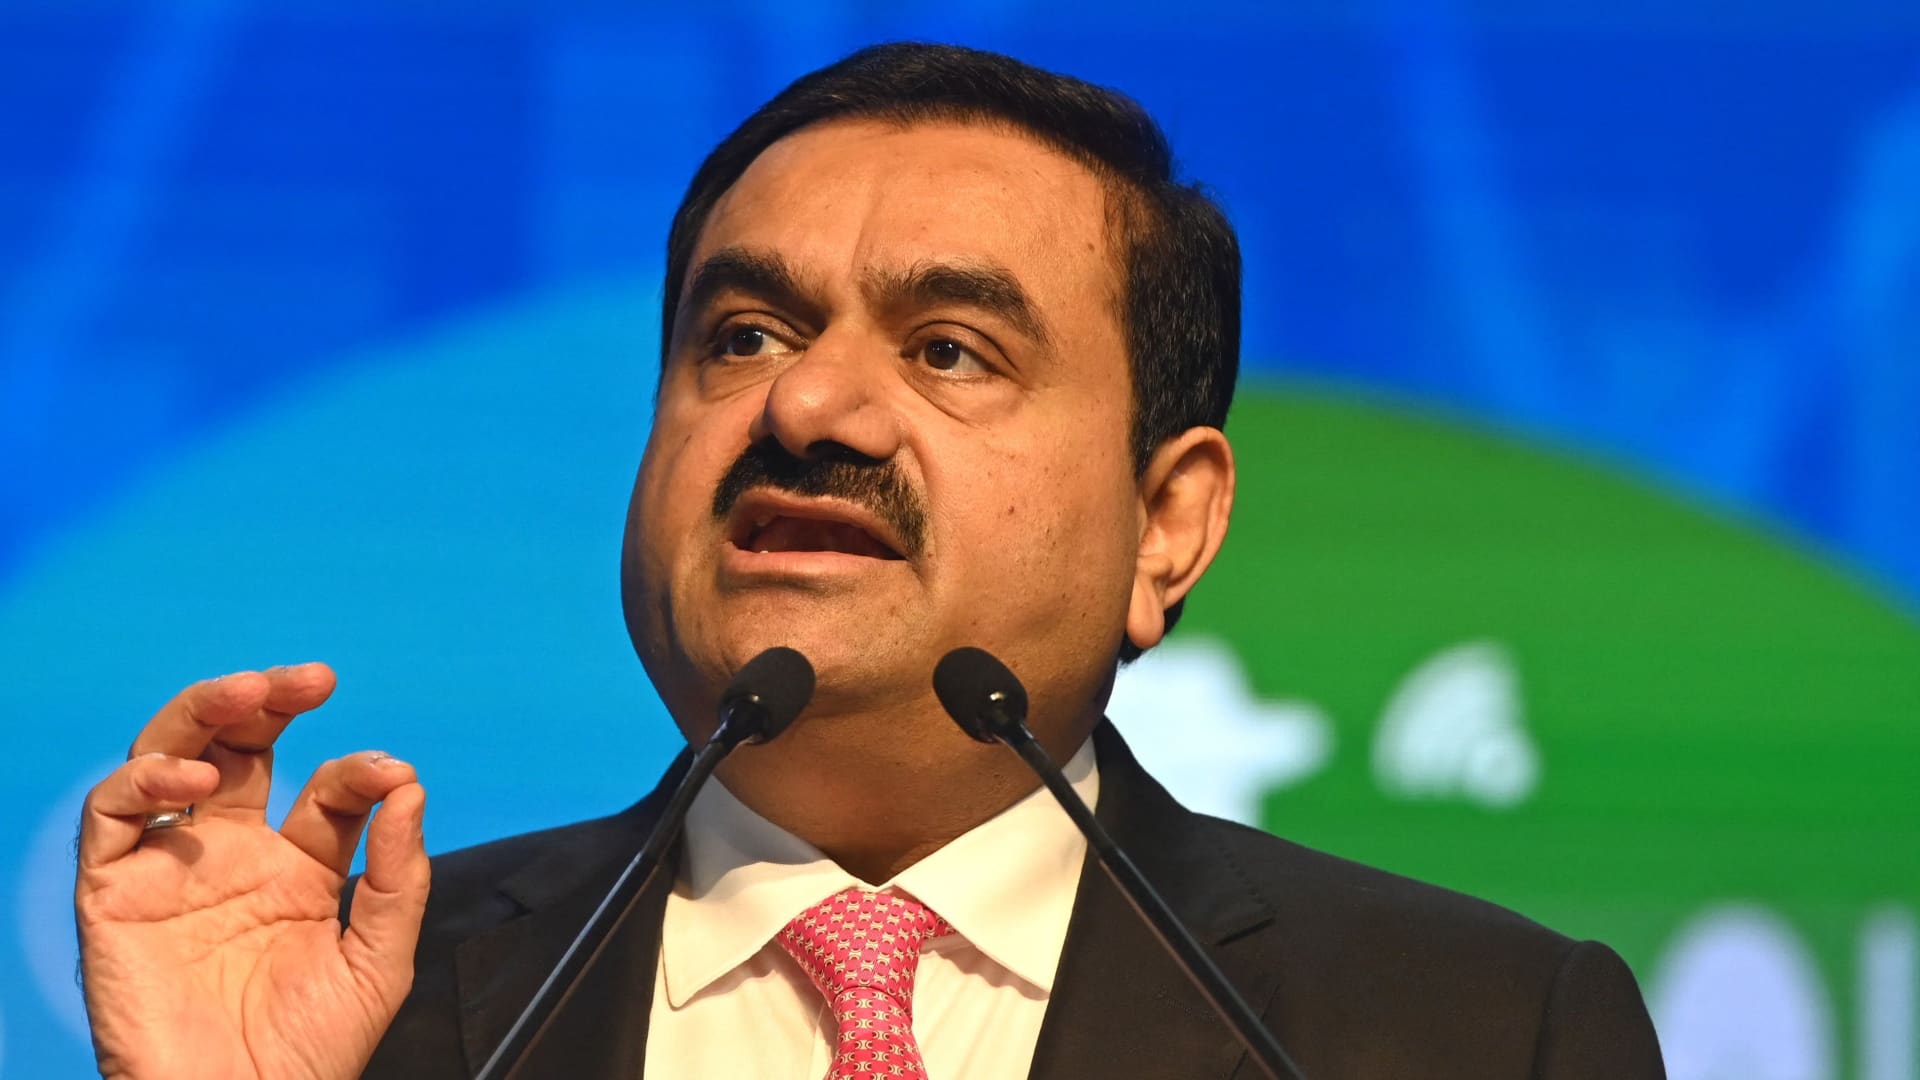 Adani Community founder Gautam Adani is yet one more time Asia’s richest person 